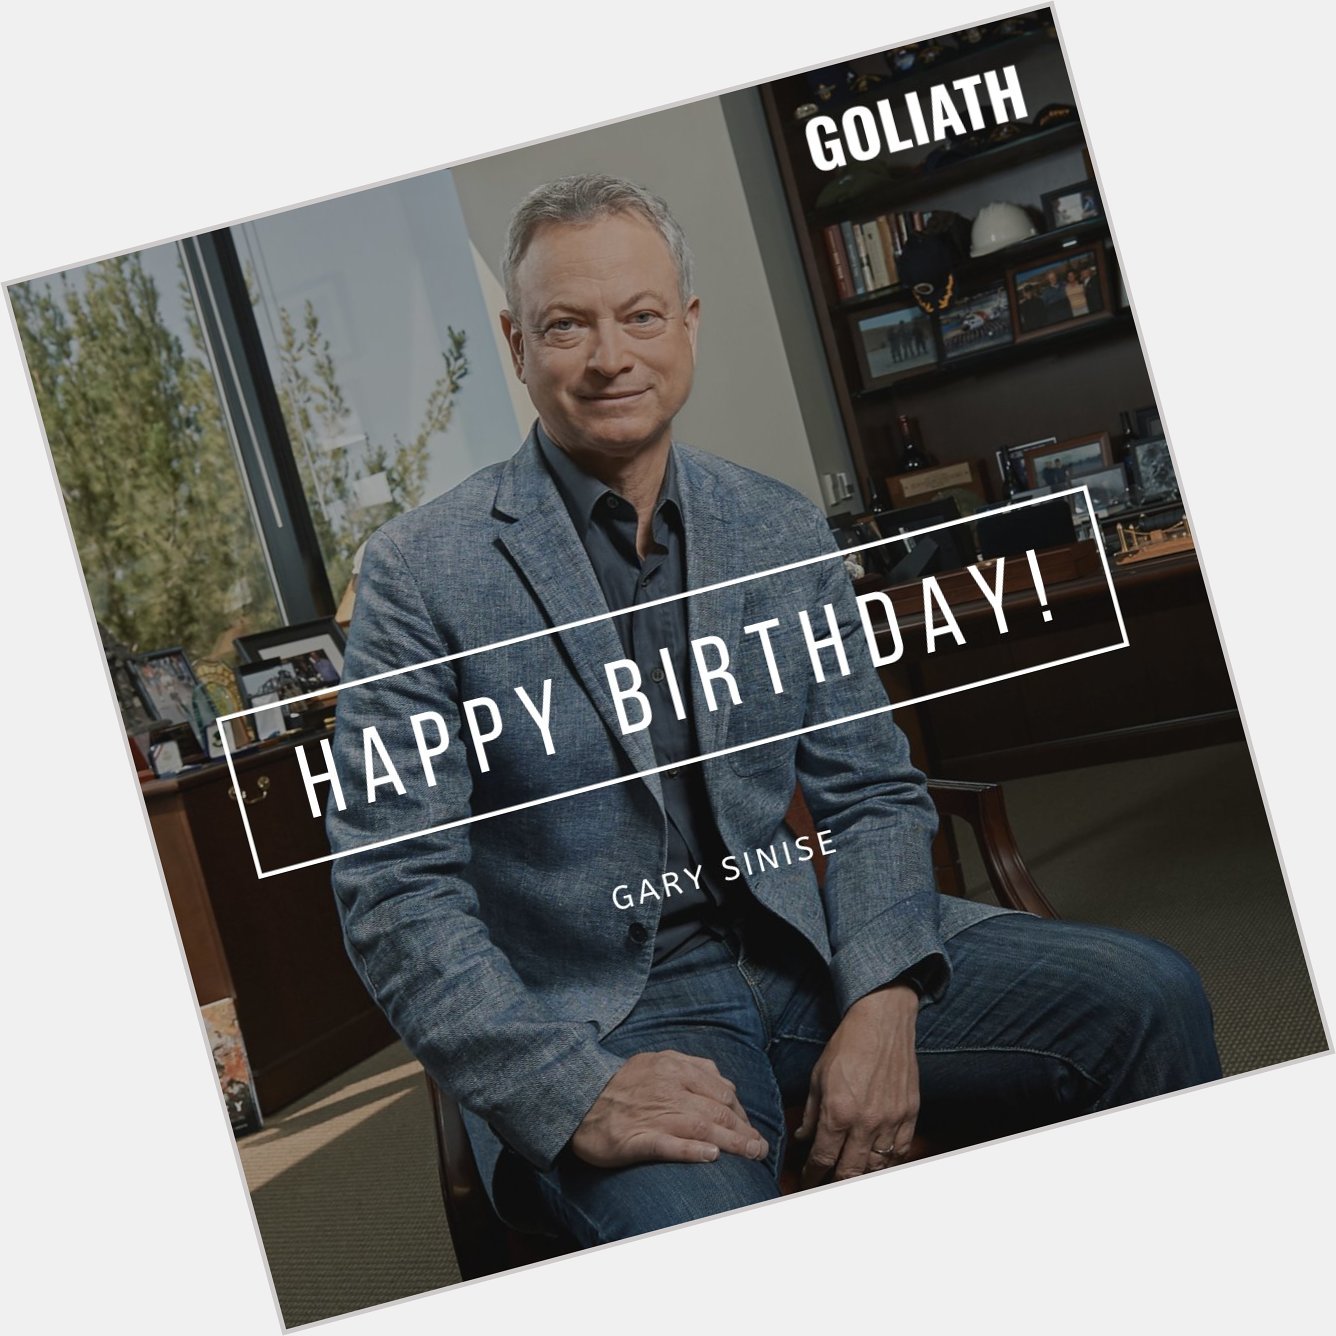 Happy 65th birthday to Gary Sinise, best known for Forrest Gump, CSI: NY, Apollo 13, and Of Mice and Men. 